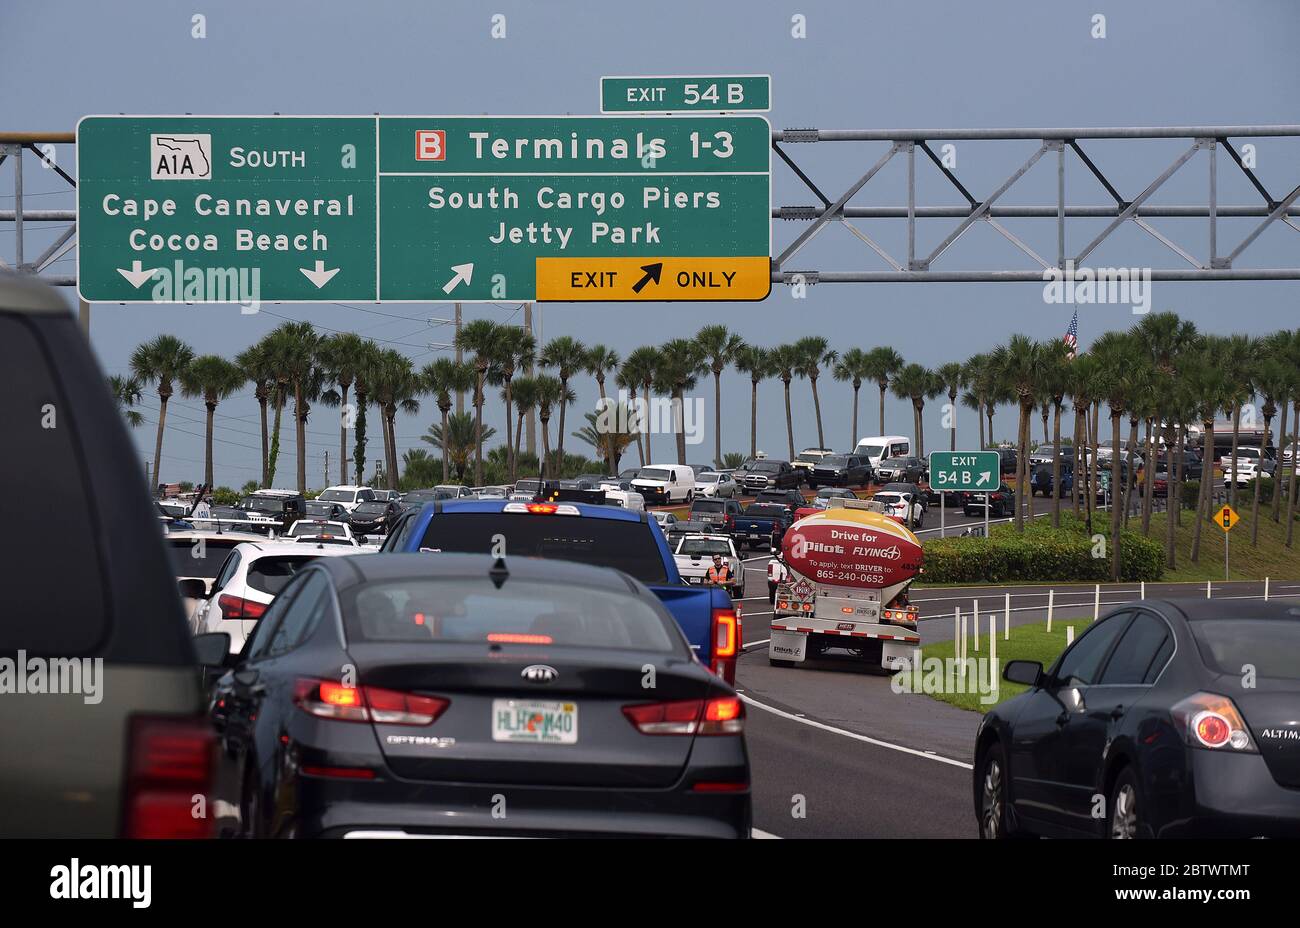 Cape Canaveral, United States. 27th May, 2020. Traffic from spectators is backed up for miles after the scheduled launch of a SpaceX Falcon 9 rocket from the Kennedy Space Center with the Crew Dragon spacecraft was delayed due to weather. The historic planned launch of NASA astronauts Doug Hurley and Bob Behnken to the International Space Station was rescheduled to May 30 and will be the first manned mission from American soil since 2011. Credit: SOPA Images Limited/Alamy Live News Stock Photo